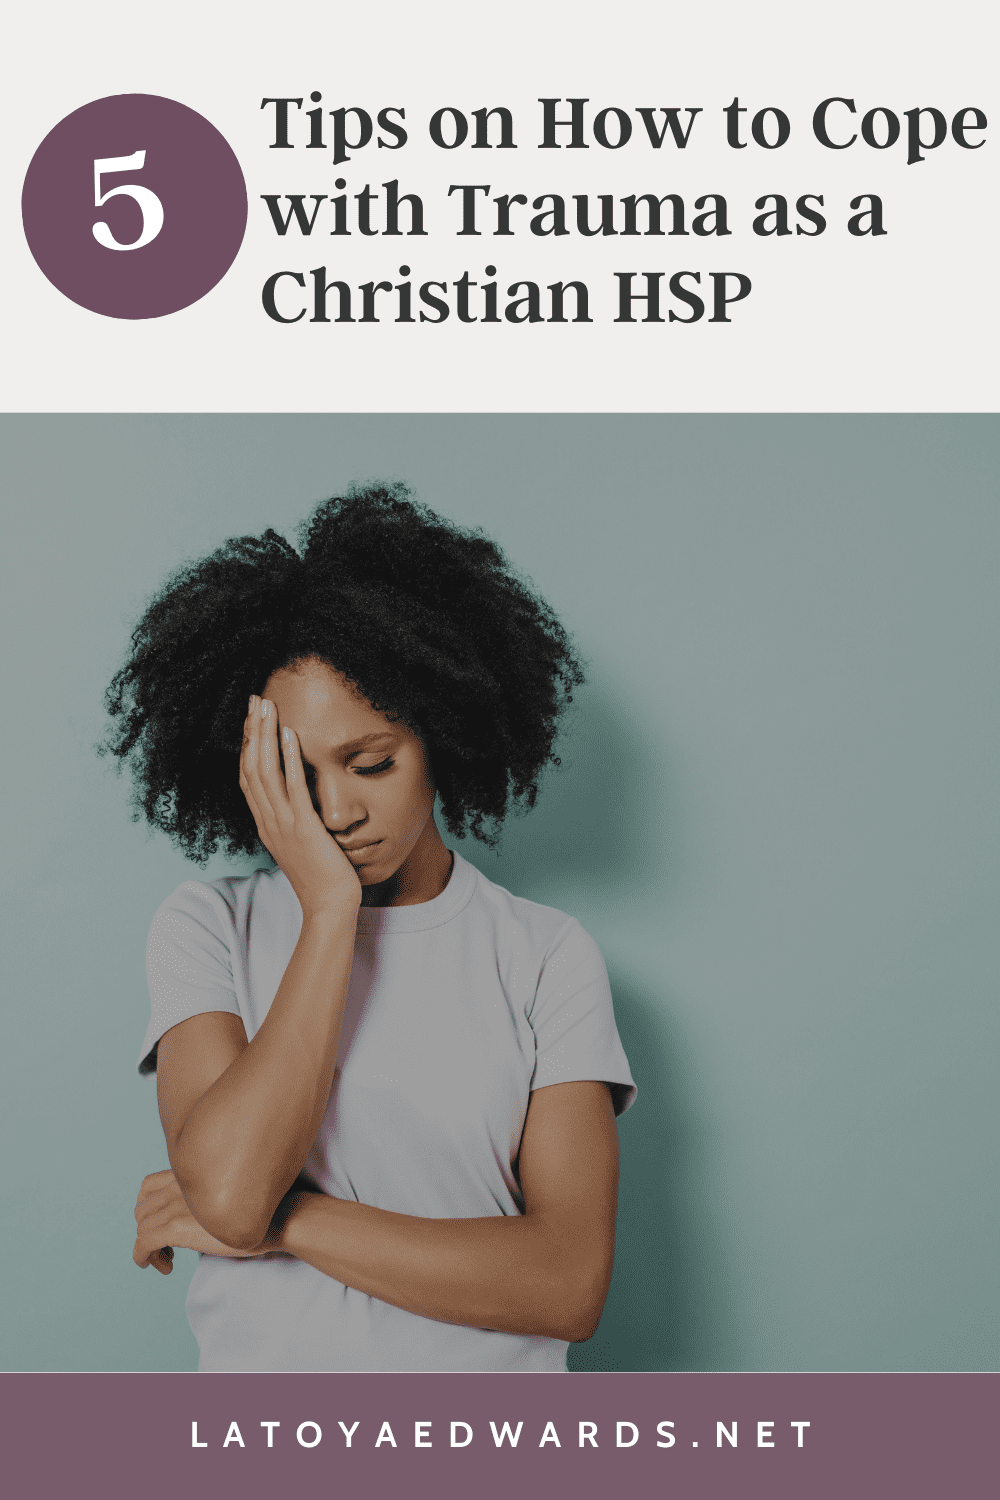 HSPs can experience trauma and stress more deeply than most. As a highly sensitive Christian woman it's important to understand the effects that stress can have on you so that you can develop a plan to cope. During hard times highly sensitive introverted Christian women feel things very deeply which can lead to a downward spiral into despair. Learn 5 practical ways to take care of yourself and get the support you need during those rough patches.